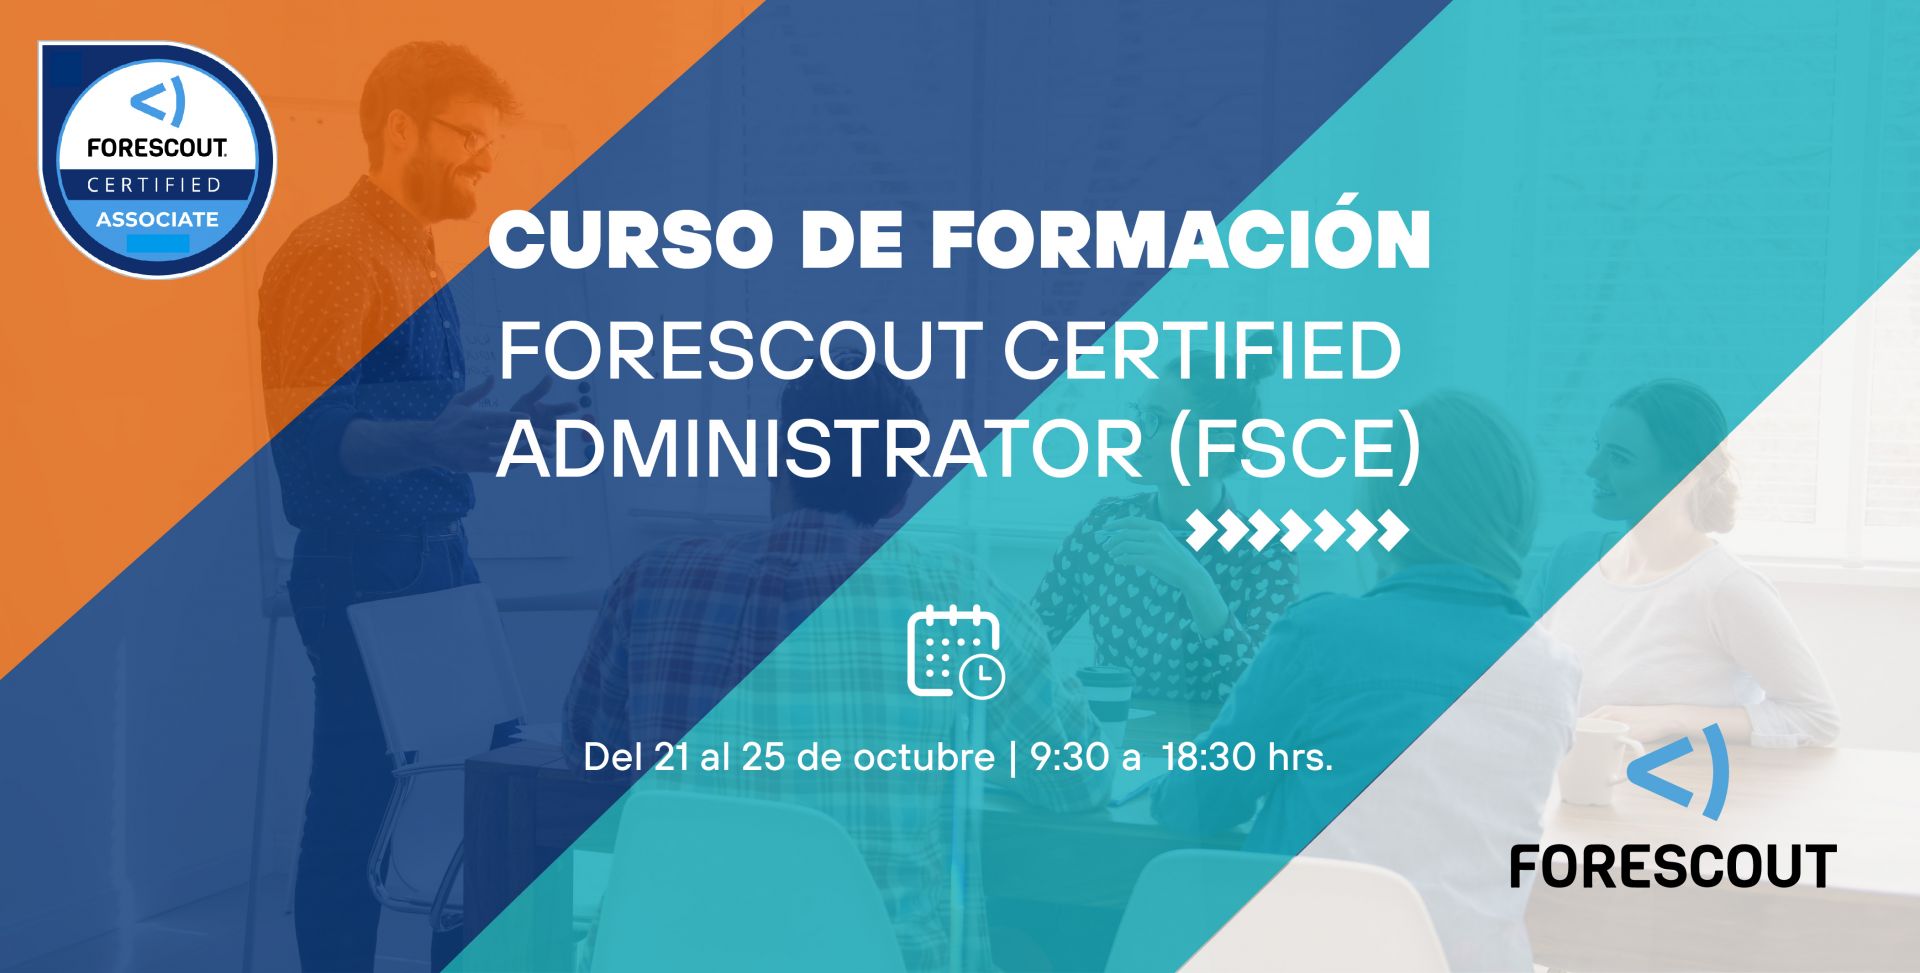 Forescout Certified Administrator (FSCE) 